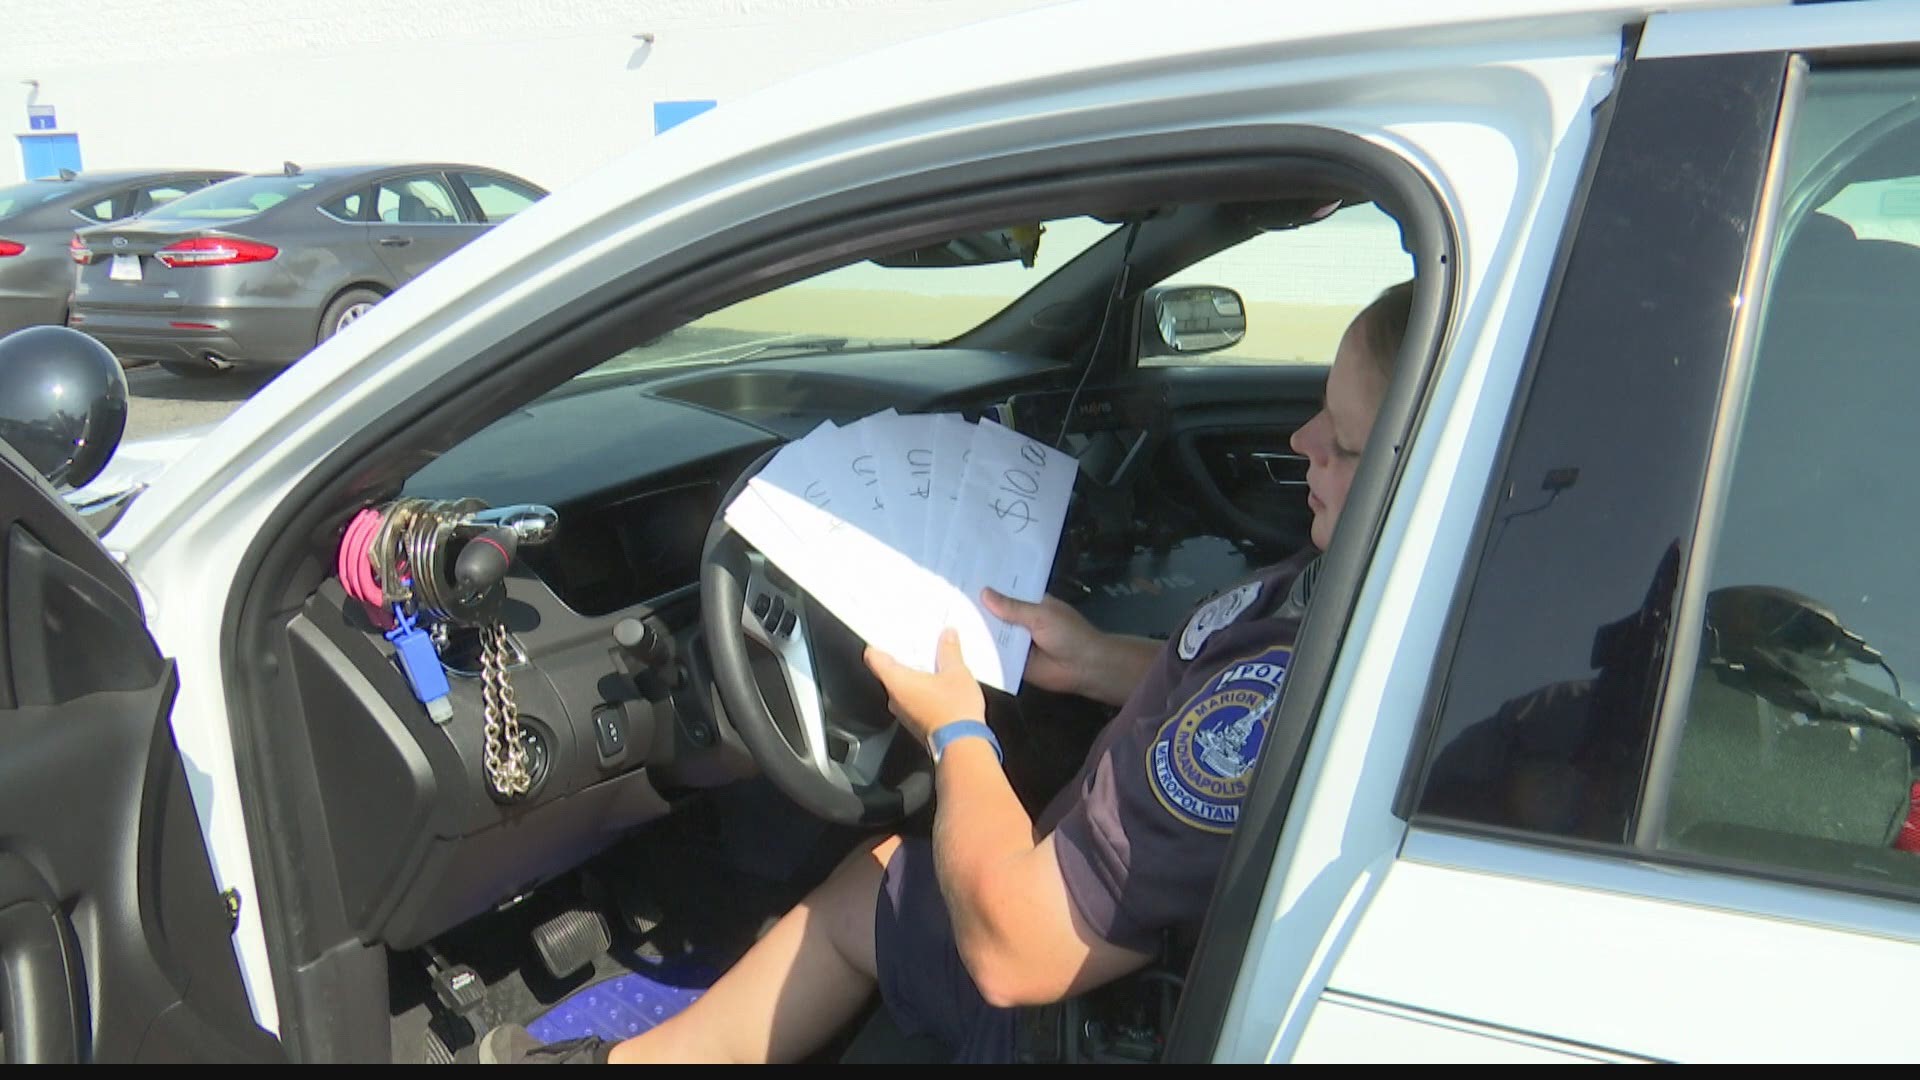 IMPD officers have been using random acts of kindness to encourage more positive interactions with the community.